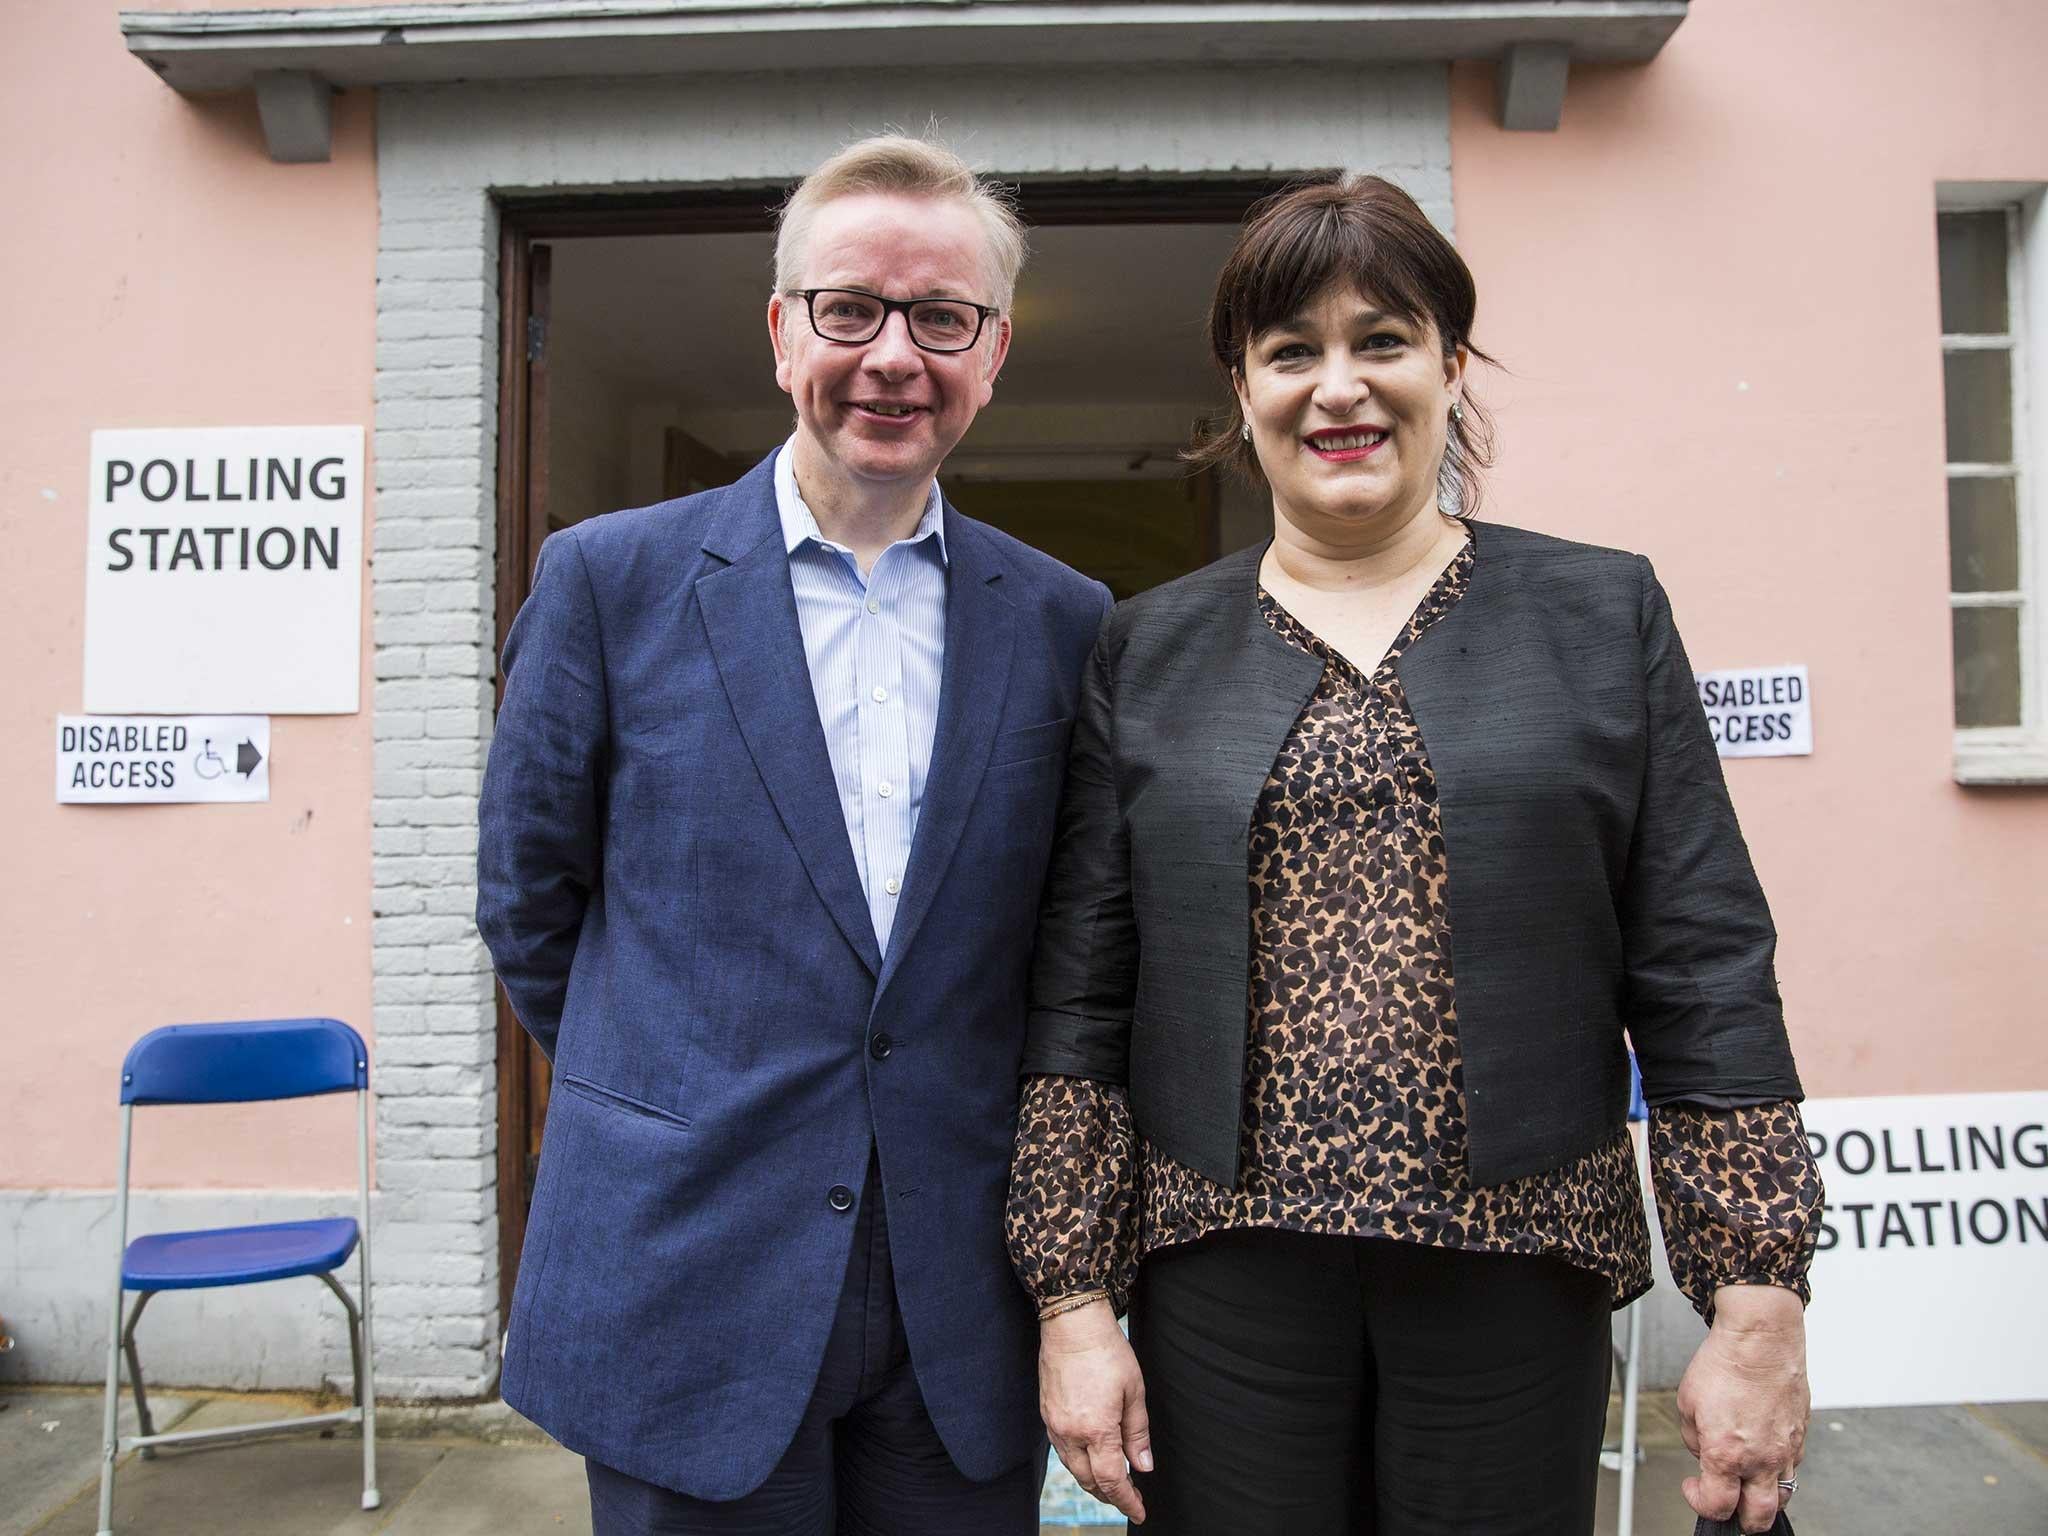 Michael Gove and Sarah Vine at a polling station?(Getty Images)